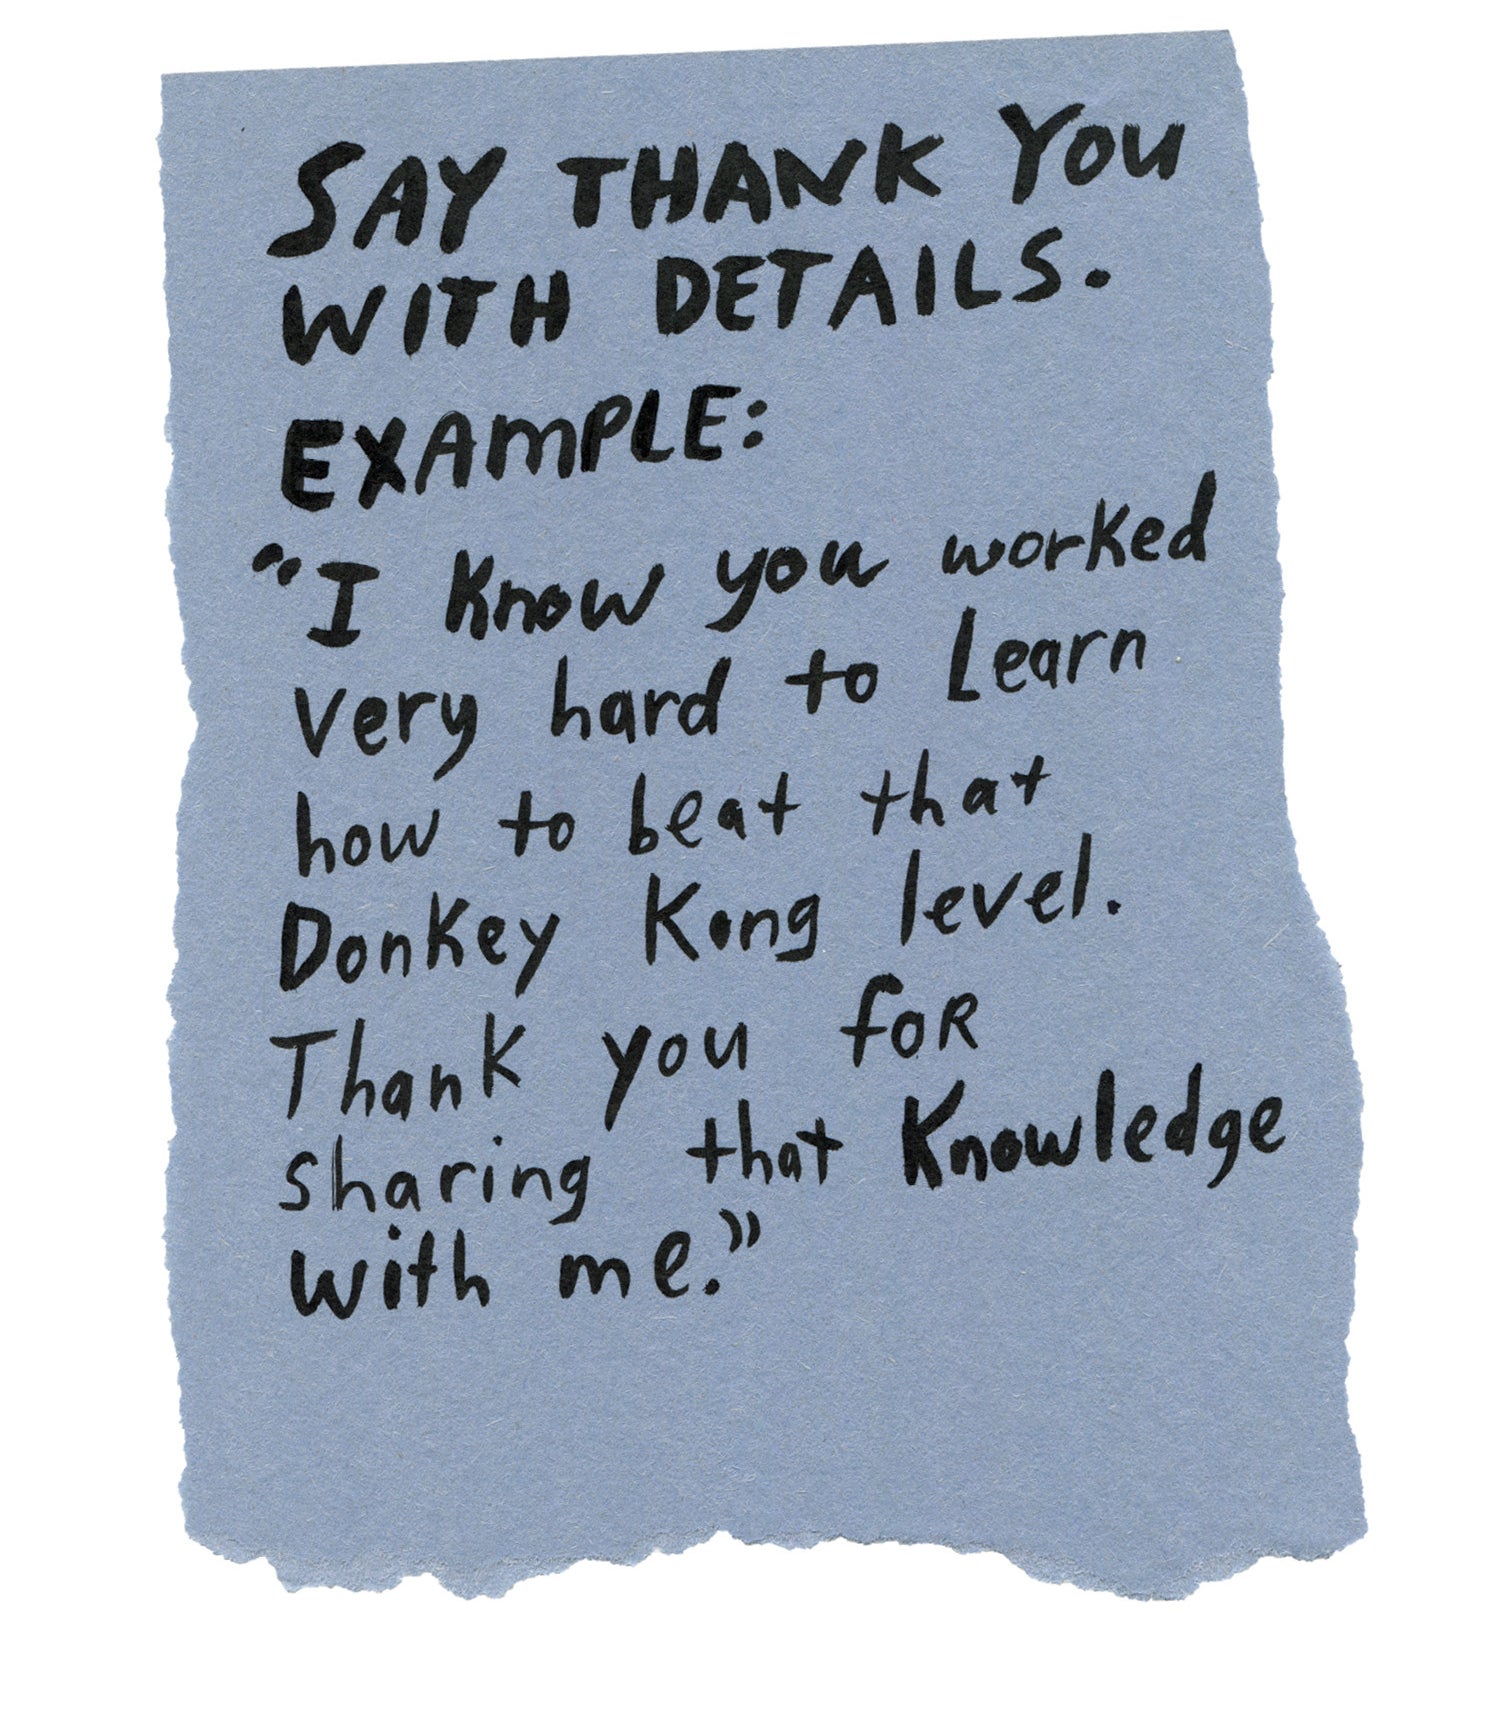 Handwritten text on torn piece of colored paper: &quot;Say thank you with details. Example: I know you worked very hard to learn how to beat that Donkey Kong level. Thank you for sharing that knowledge with me.&quot;